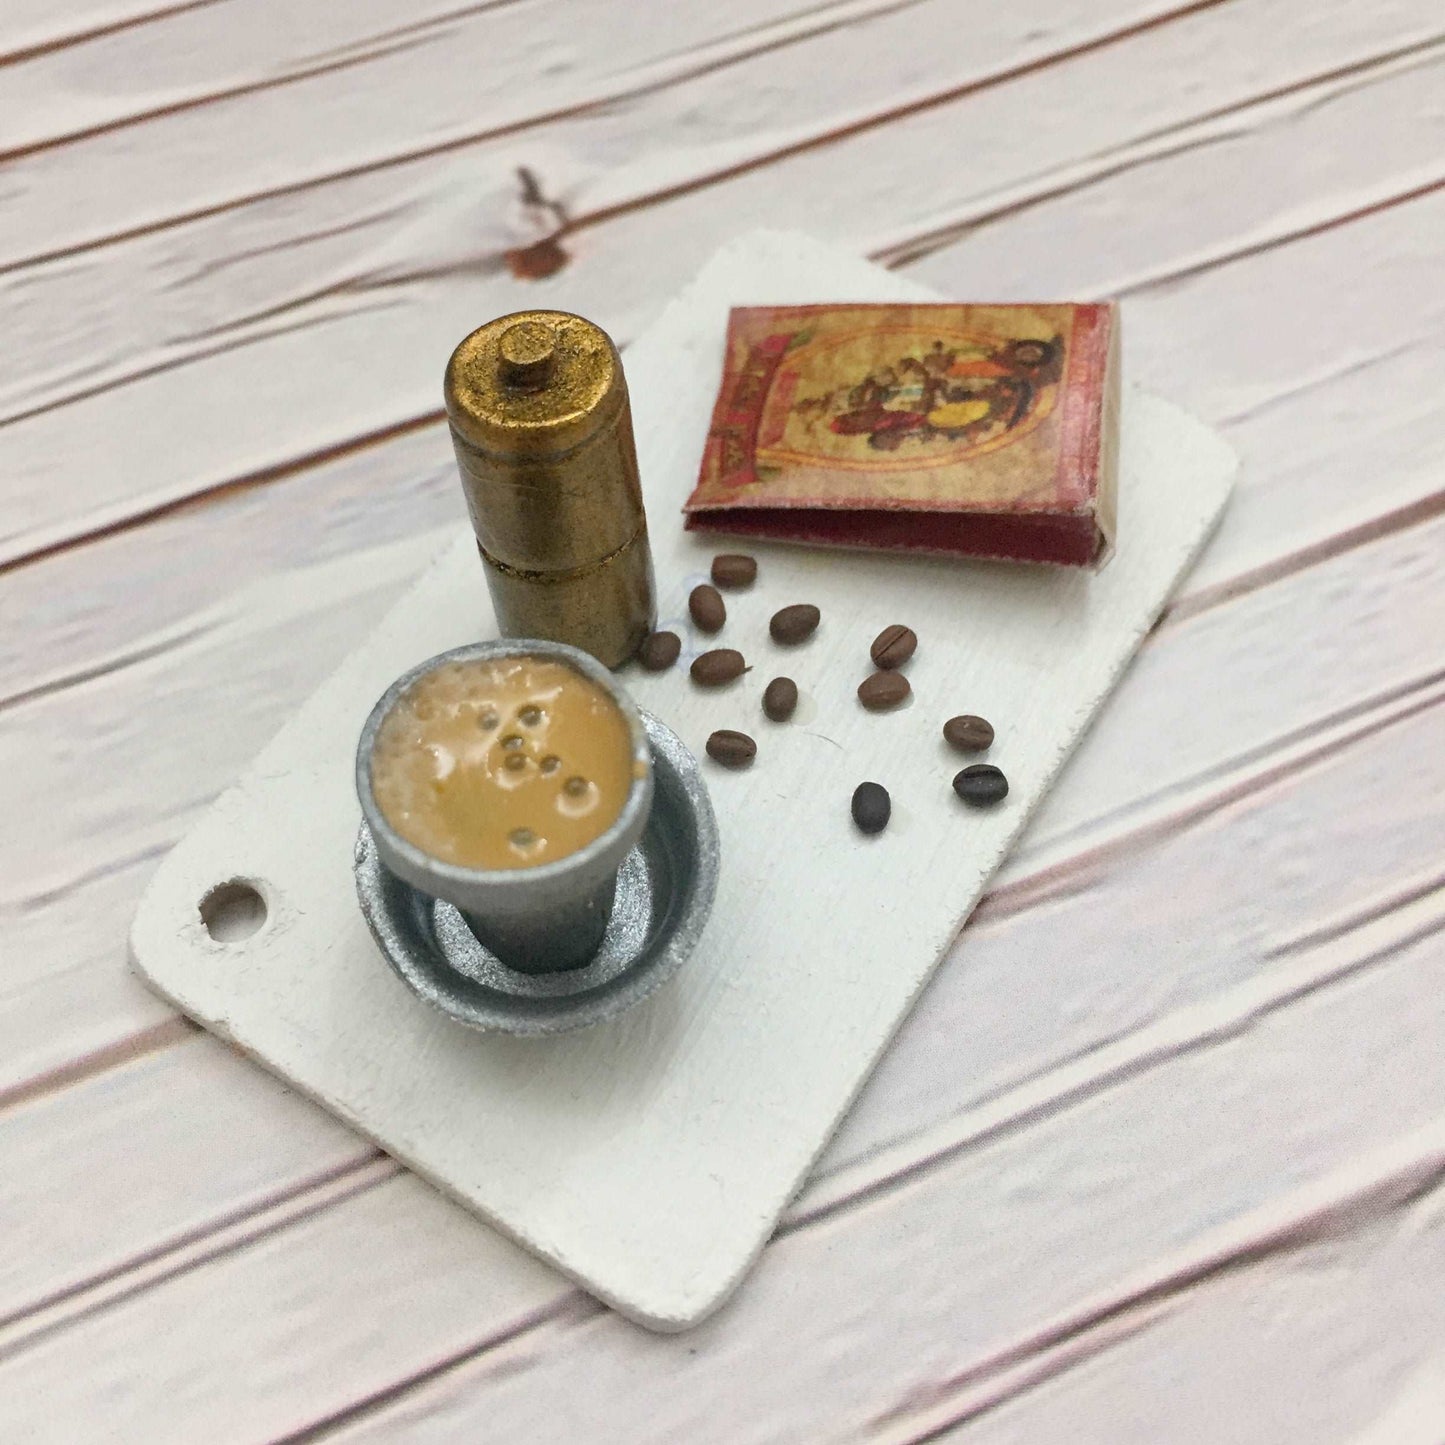 South Indian Filter Coffee Miniature Food Magnet